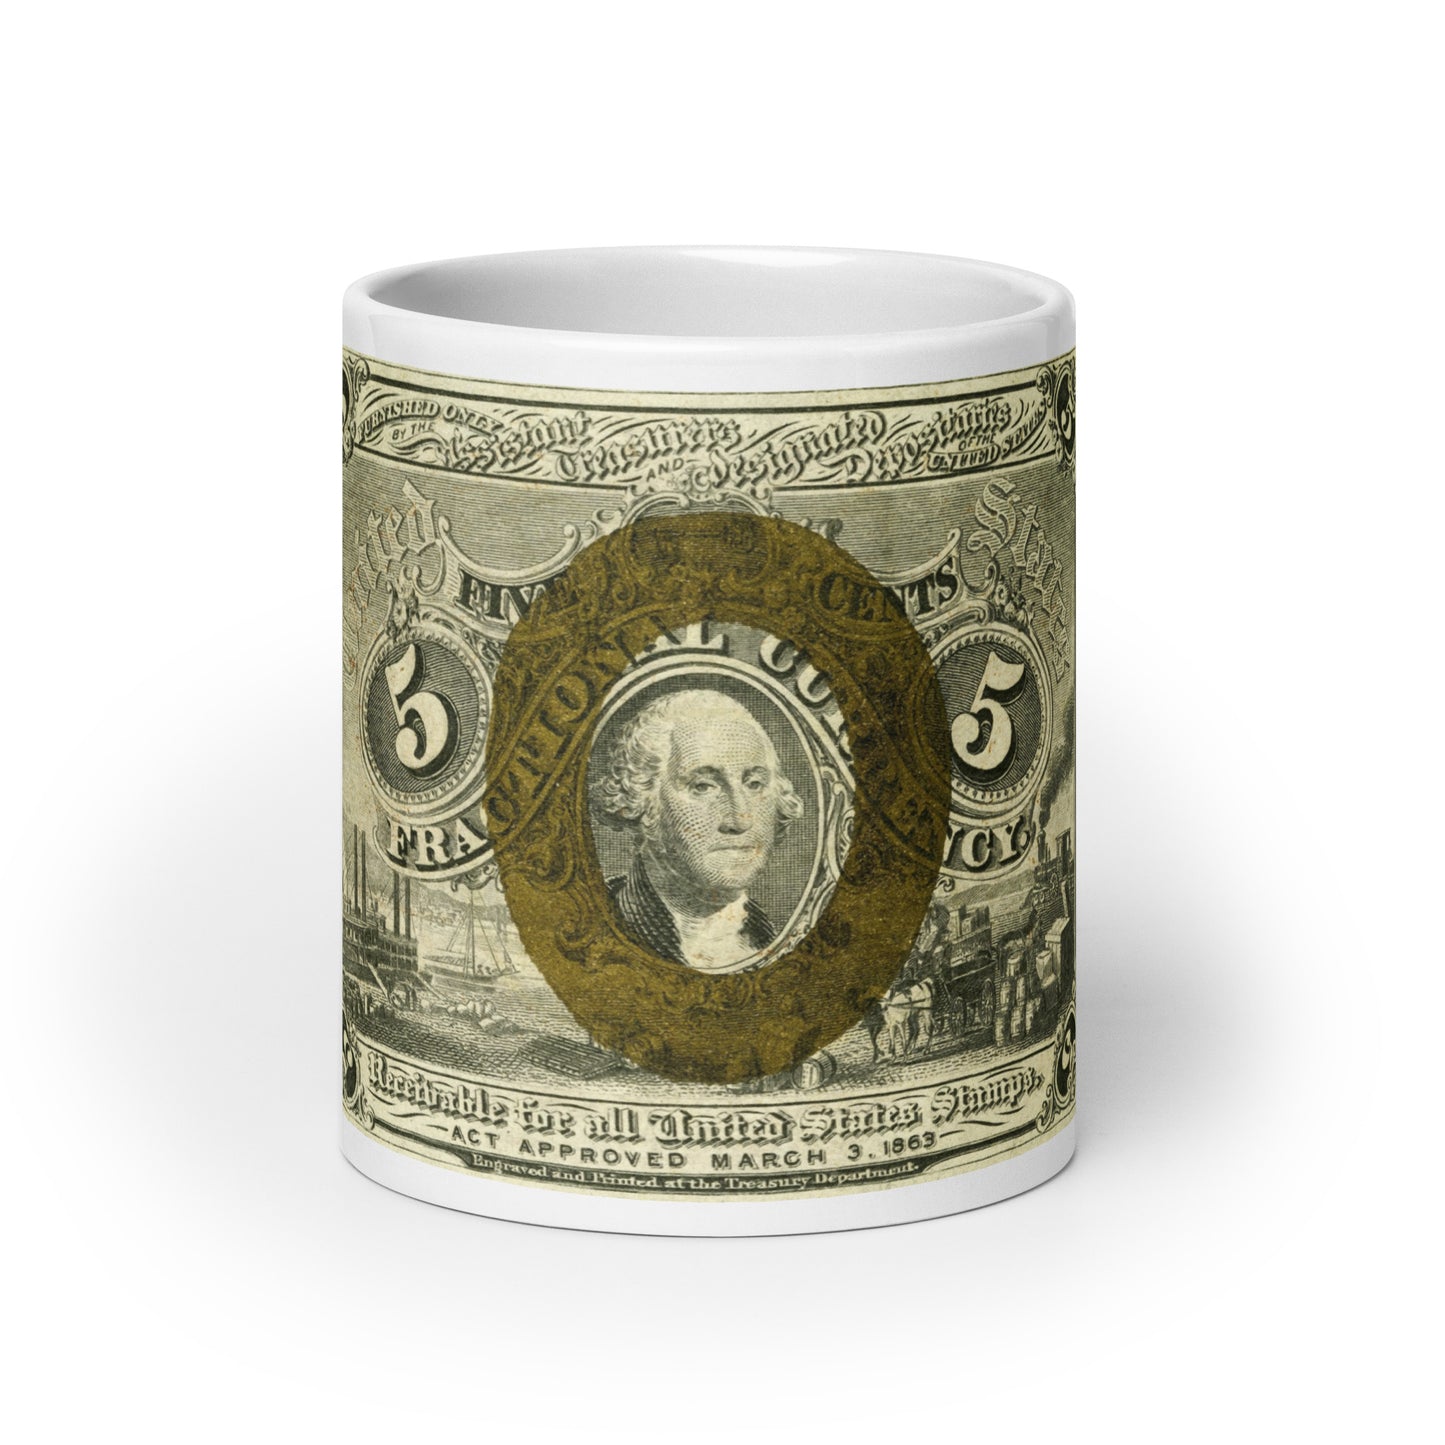 5 Cents 2ND Issue Fractional Currency Edition - Classic Currency Collector's Mug